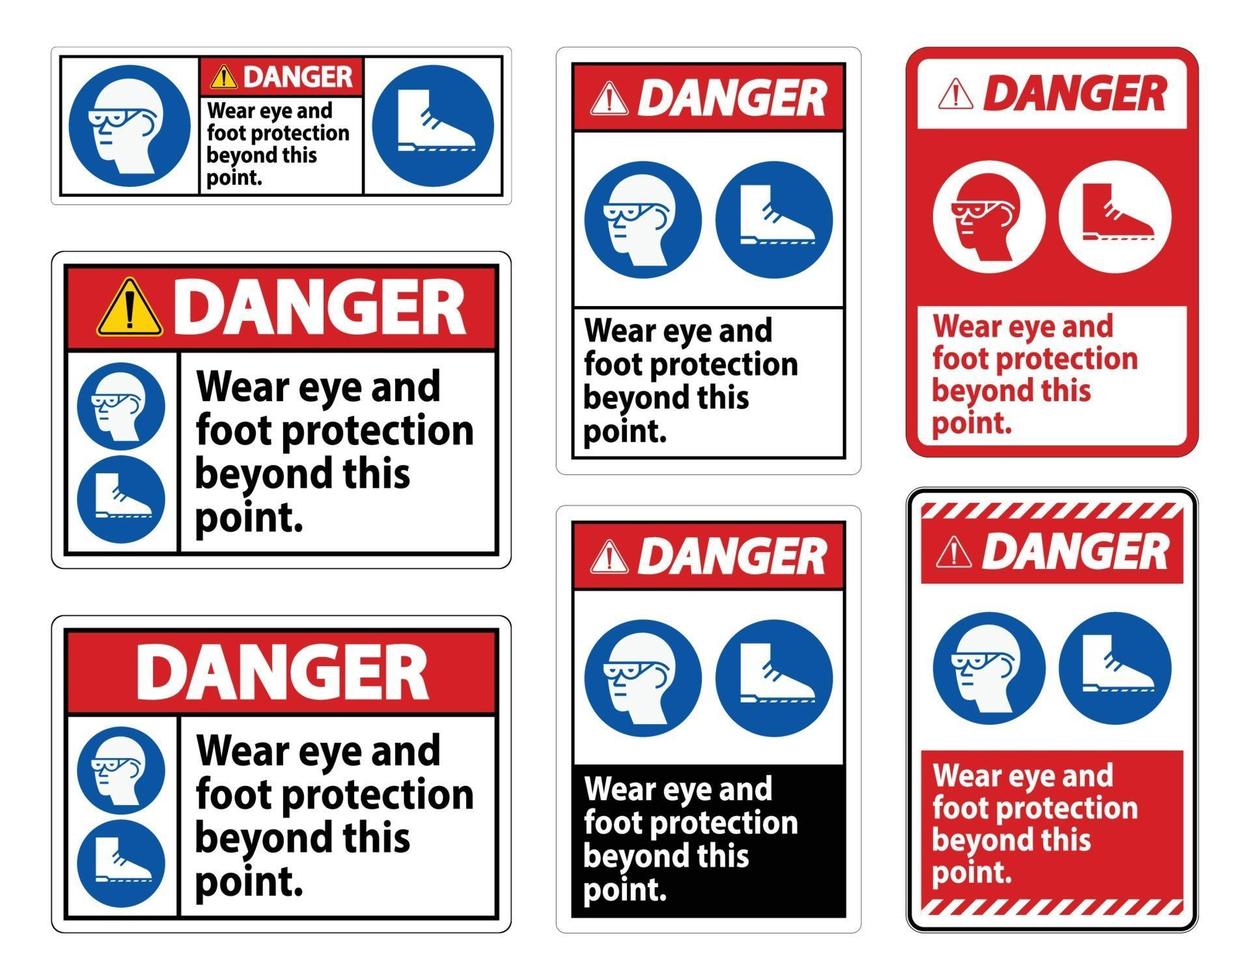 Danger Sign Wear Eye And Foot Protection Beyond This Point With PPE Symbols vector